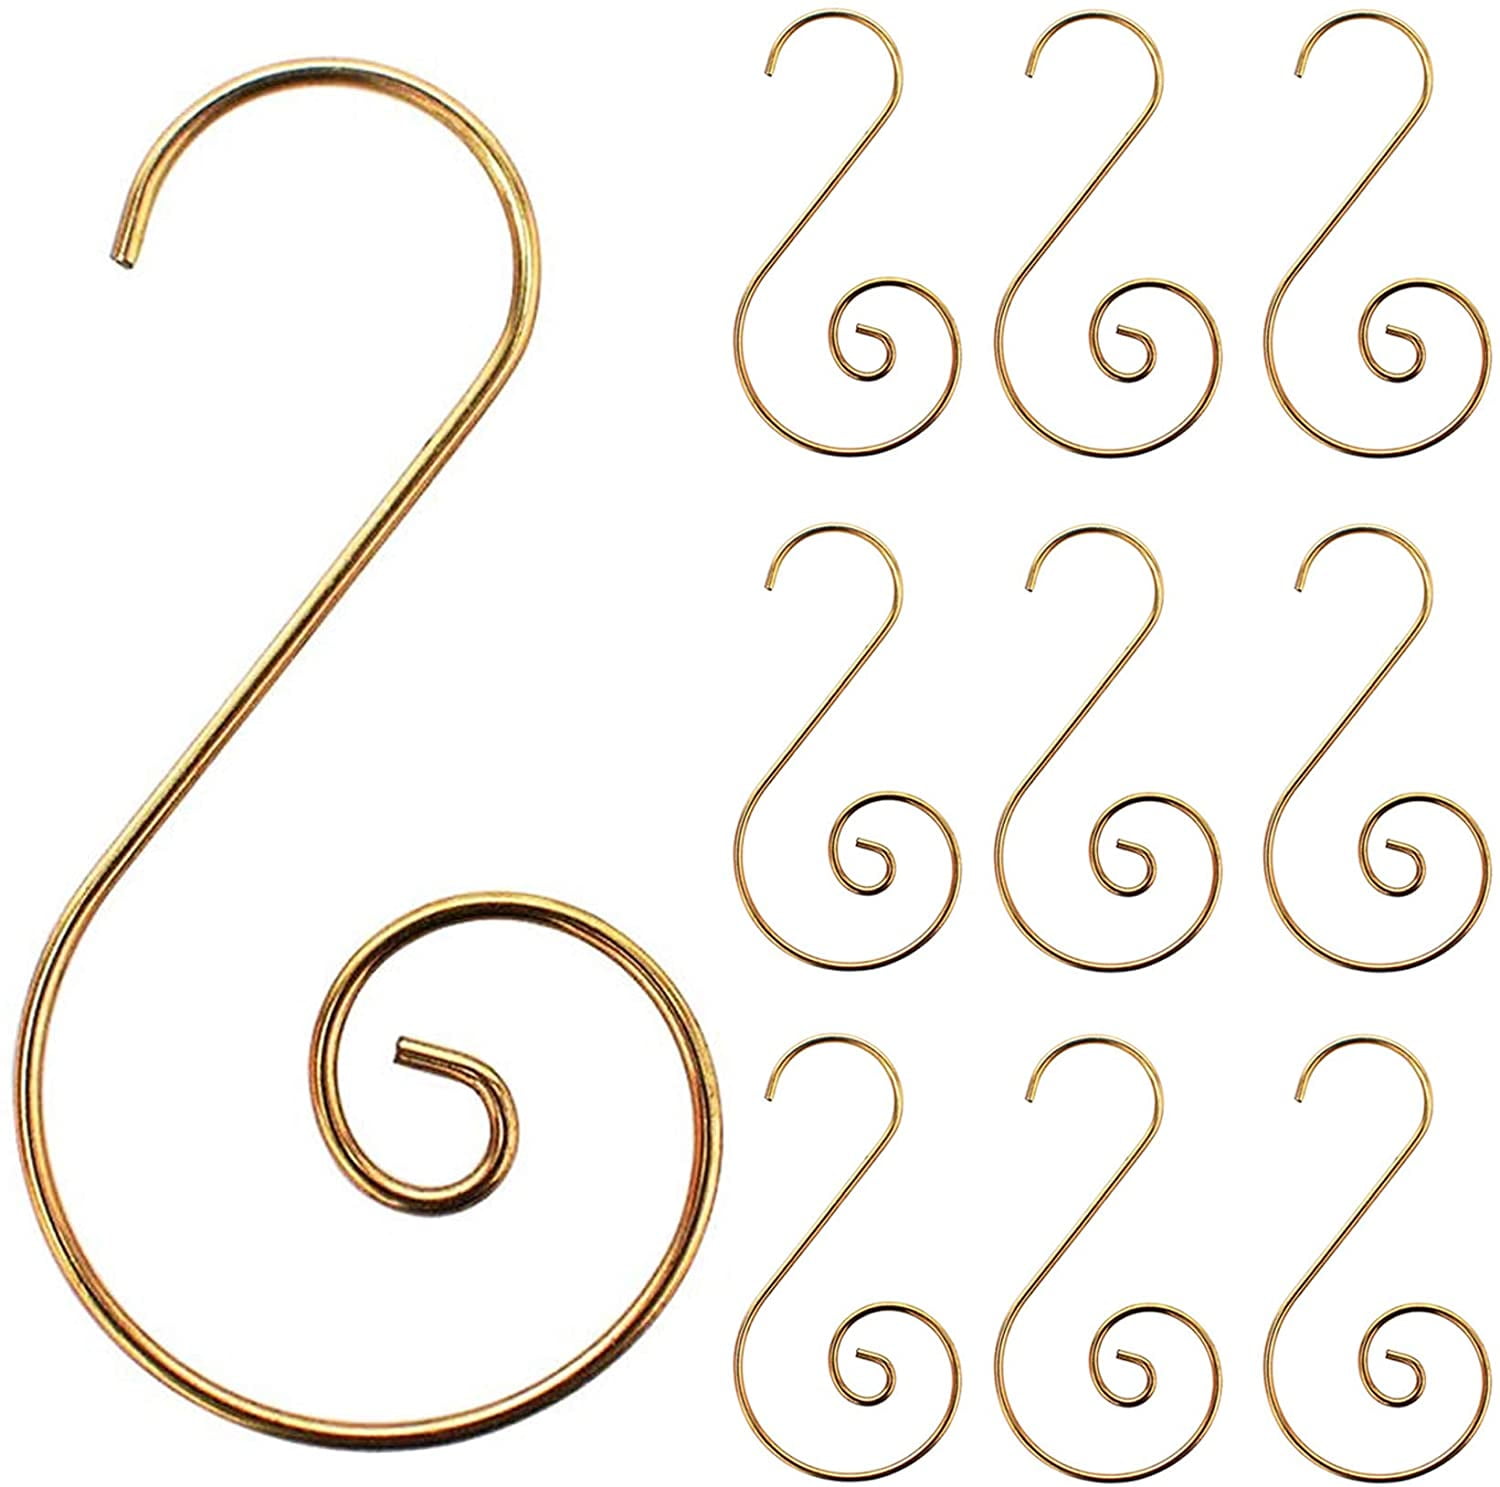 12 Gold Swirl Christmas Tree Ornament Hooks w/ Frosted White Crystals Gold Beads 